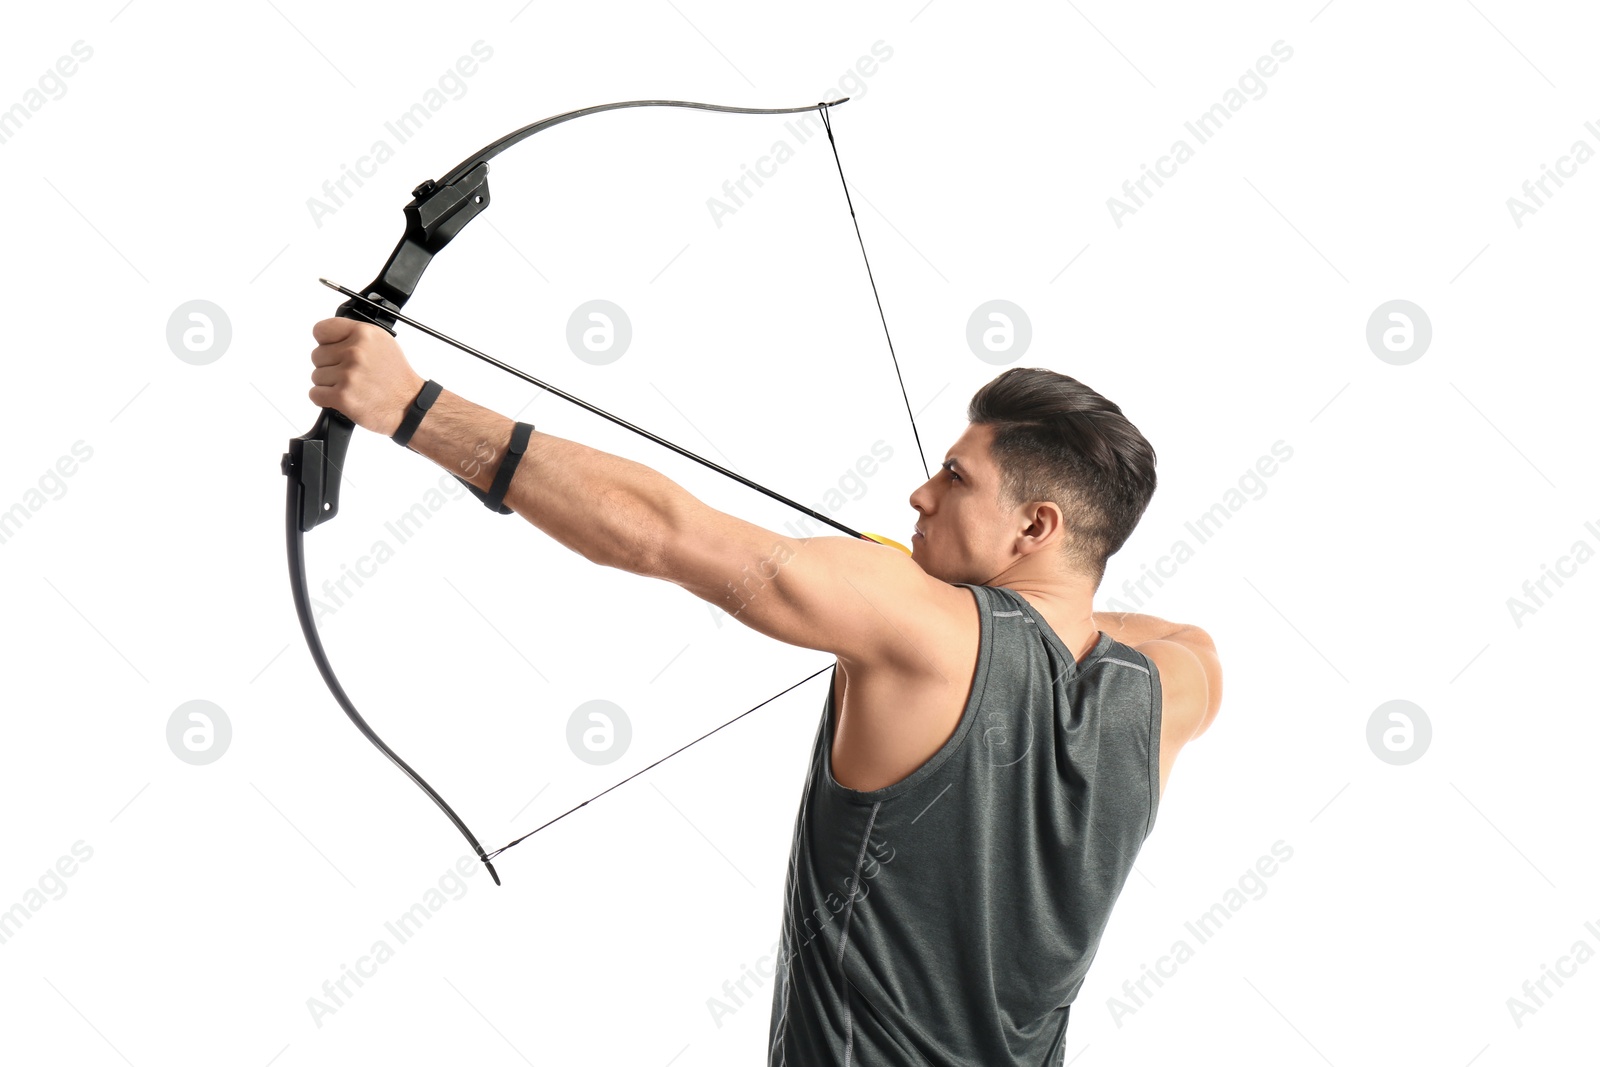 Photo of Man with bow and arrow practicing archery on white background